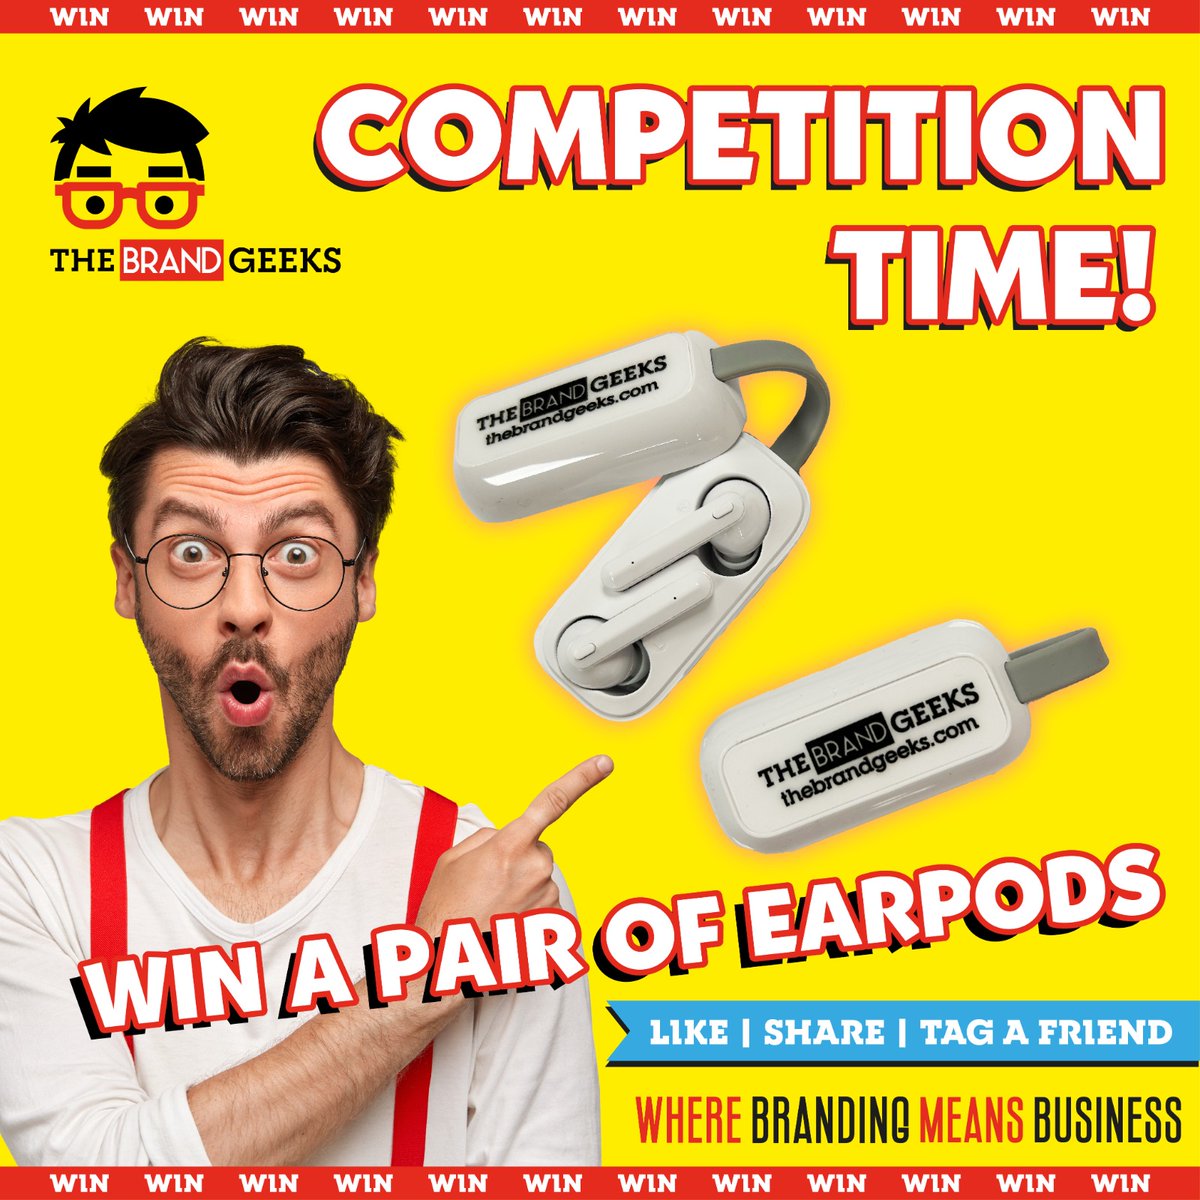 Who would like to get their hands on The Brand Geeks EarPods ???... you know what to do ! 

👉 LIKE ...SHARE & TAG A FRIEND !! 🤓 

#competitiontime #thebrandgeeks #Kerry #supportlocalbusiness #BrandedEarPods #EarPods #CorporateBranding